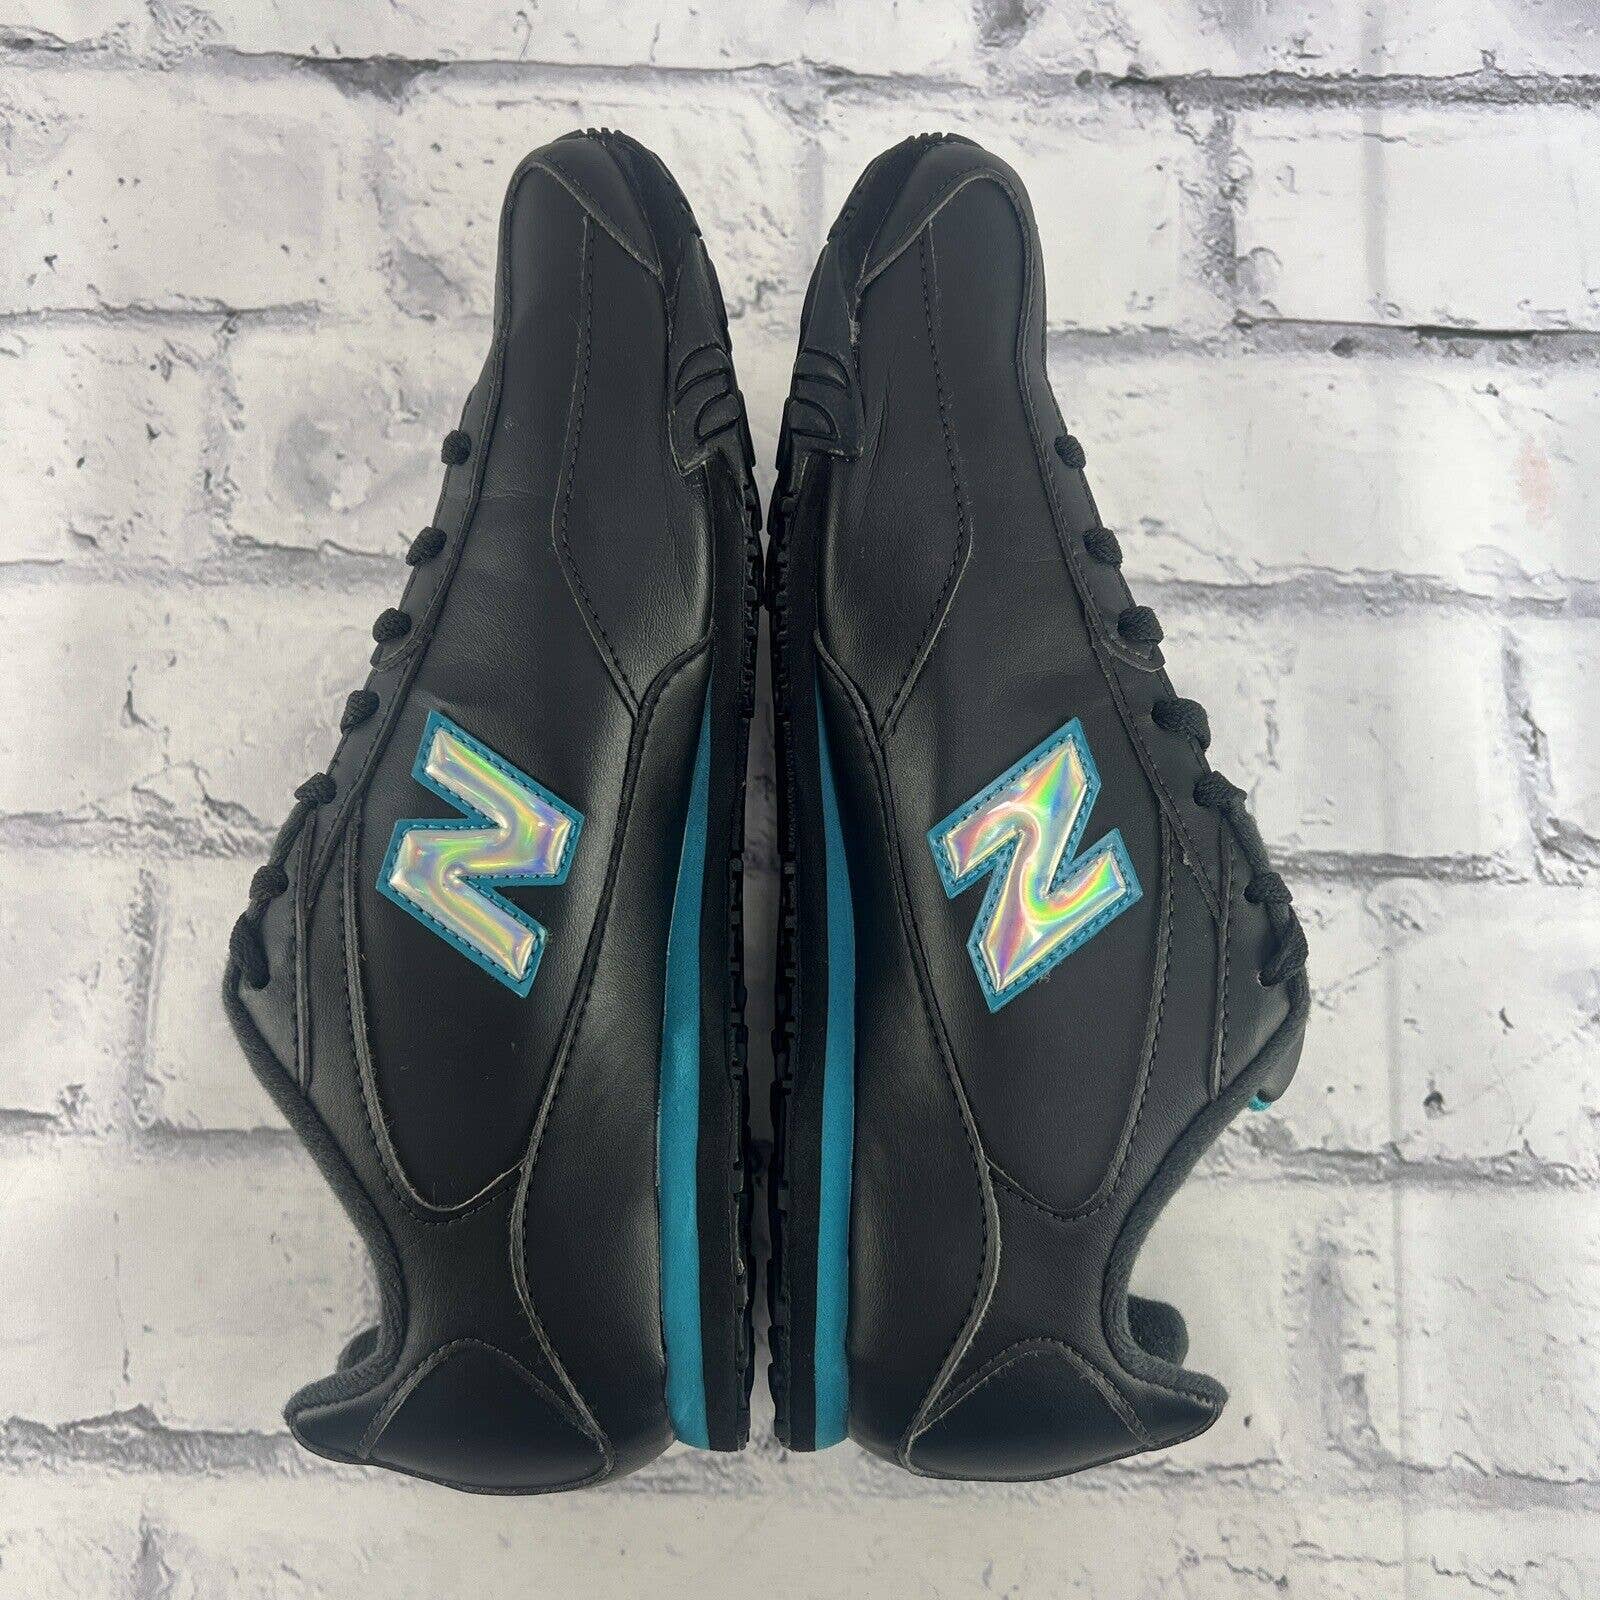 New Balance 442 Sneakers Women's Size 8 D Black Leather Athletic Running Shoes